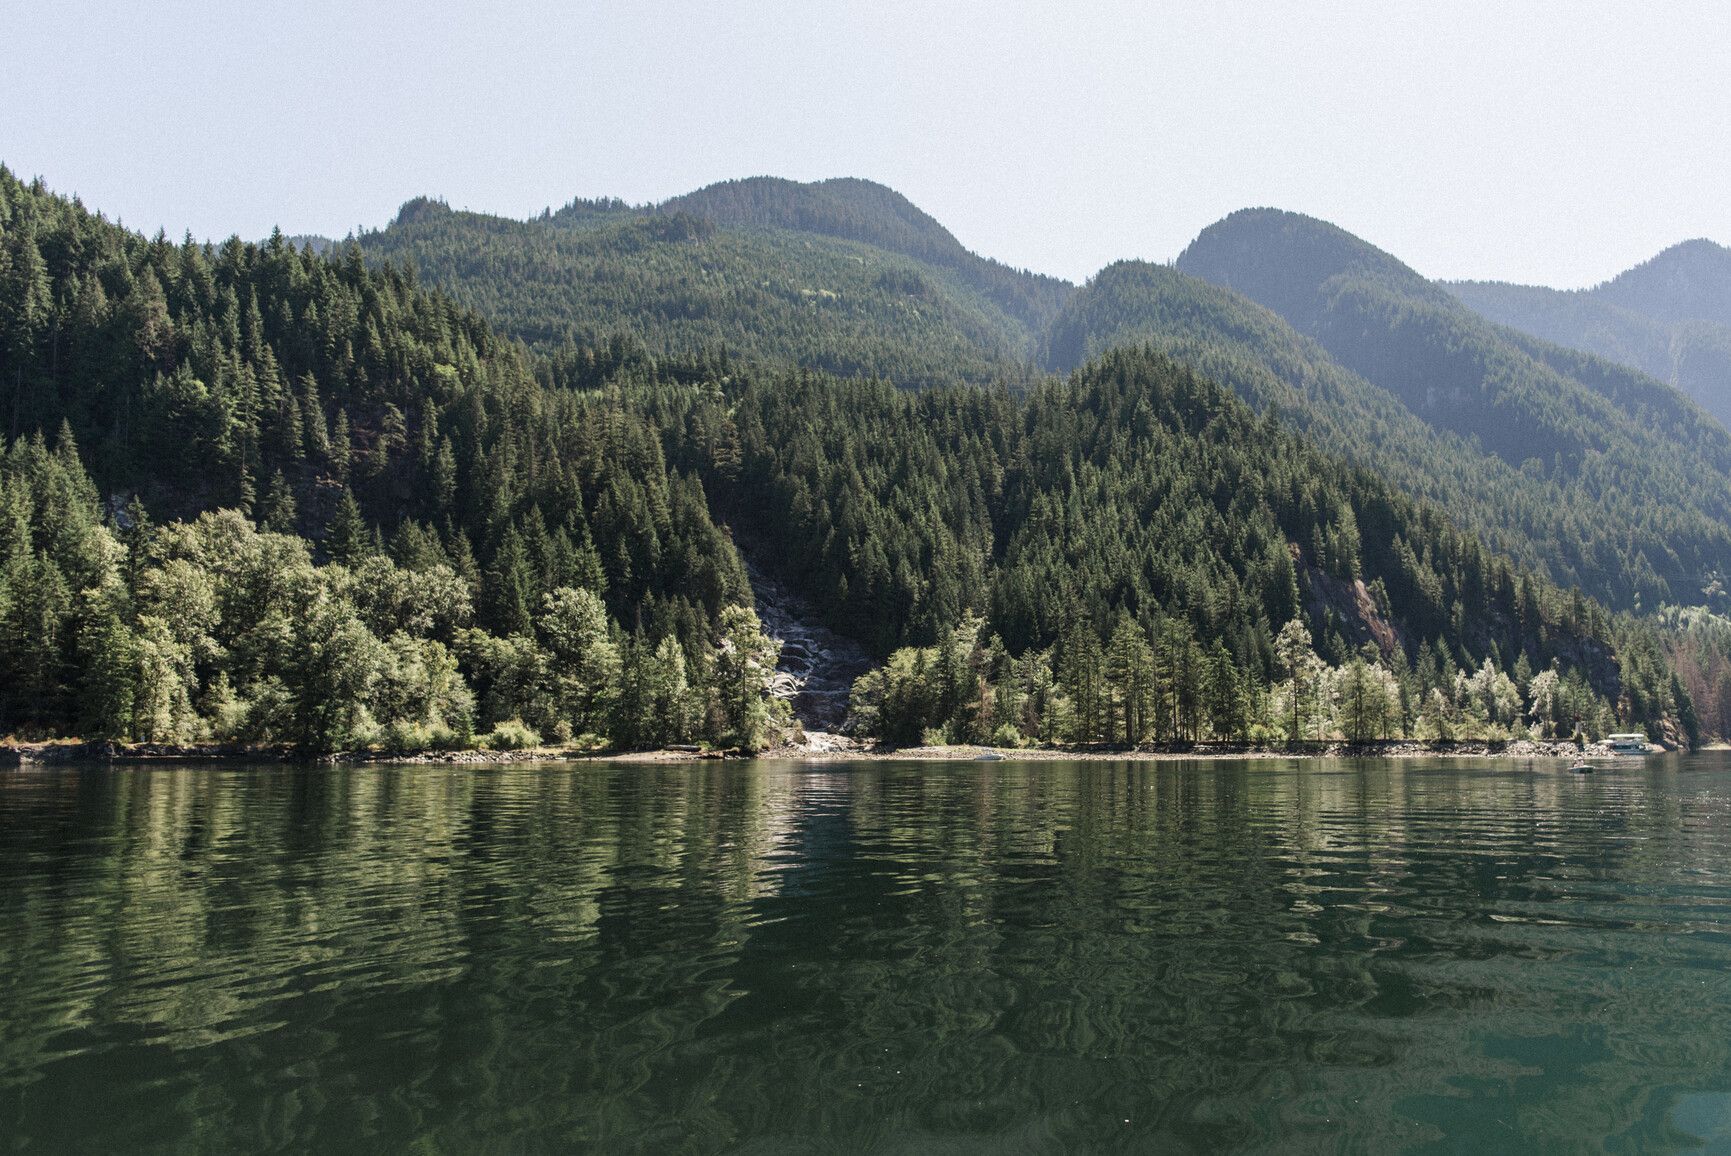 View from the water of Granite Falls, mountains, and forests along Indian Arm. Say Nuth Khaw Yum Park.